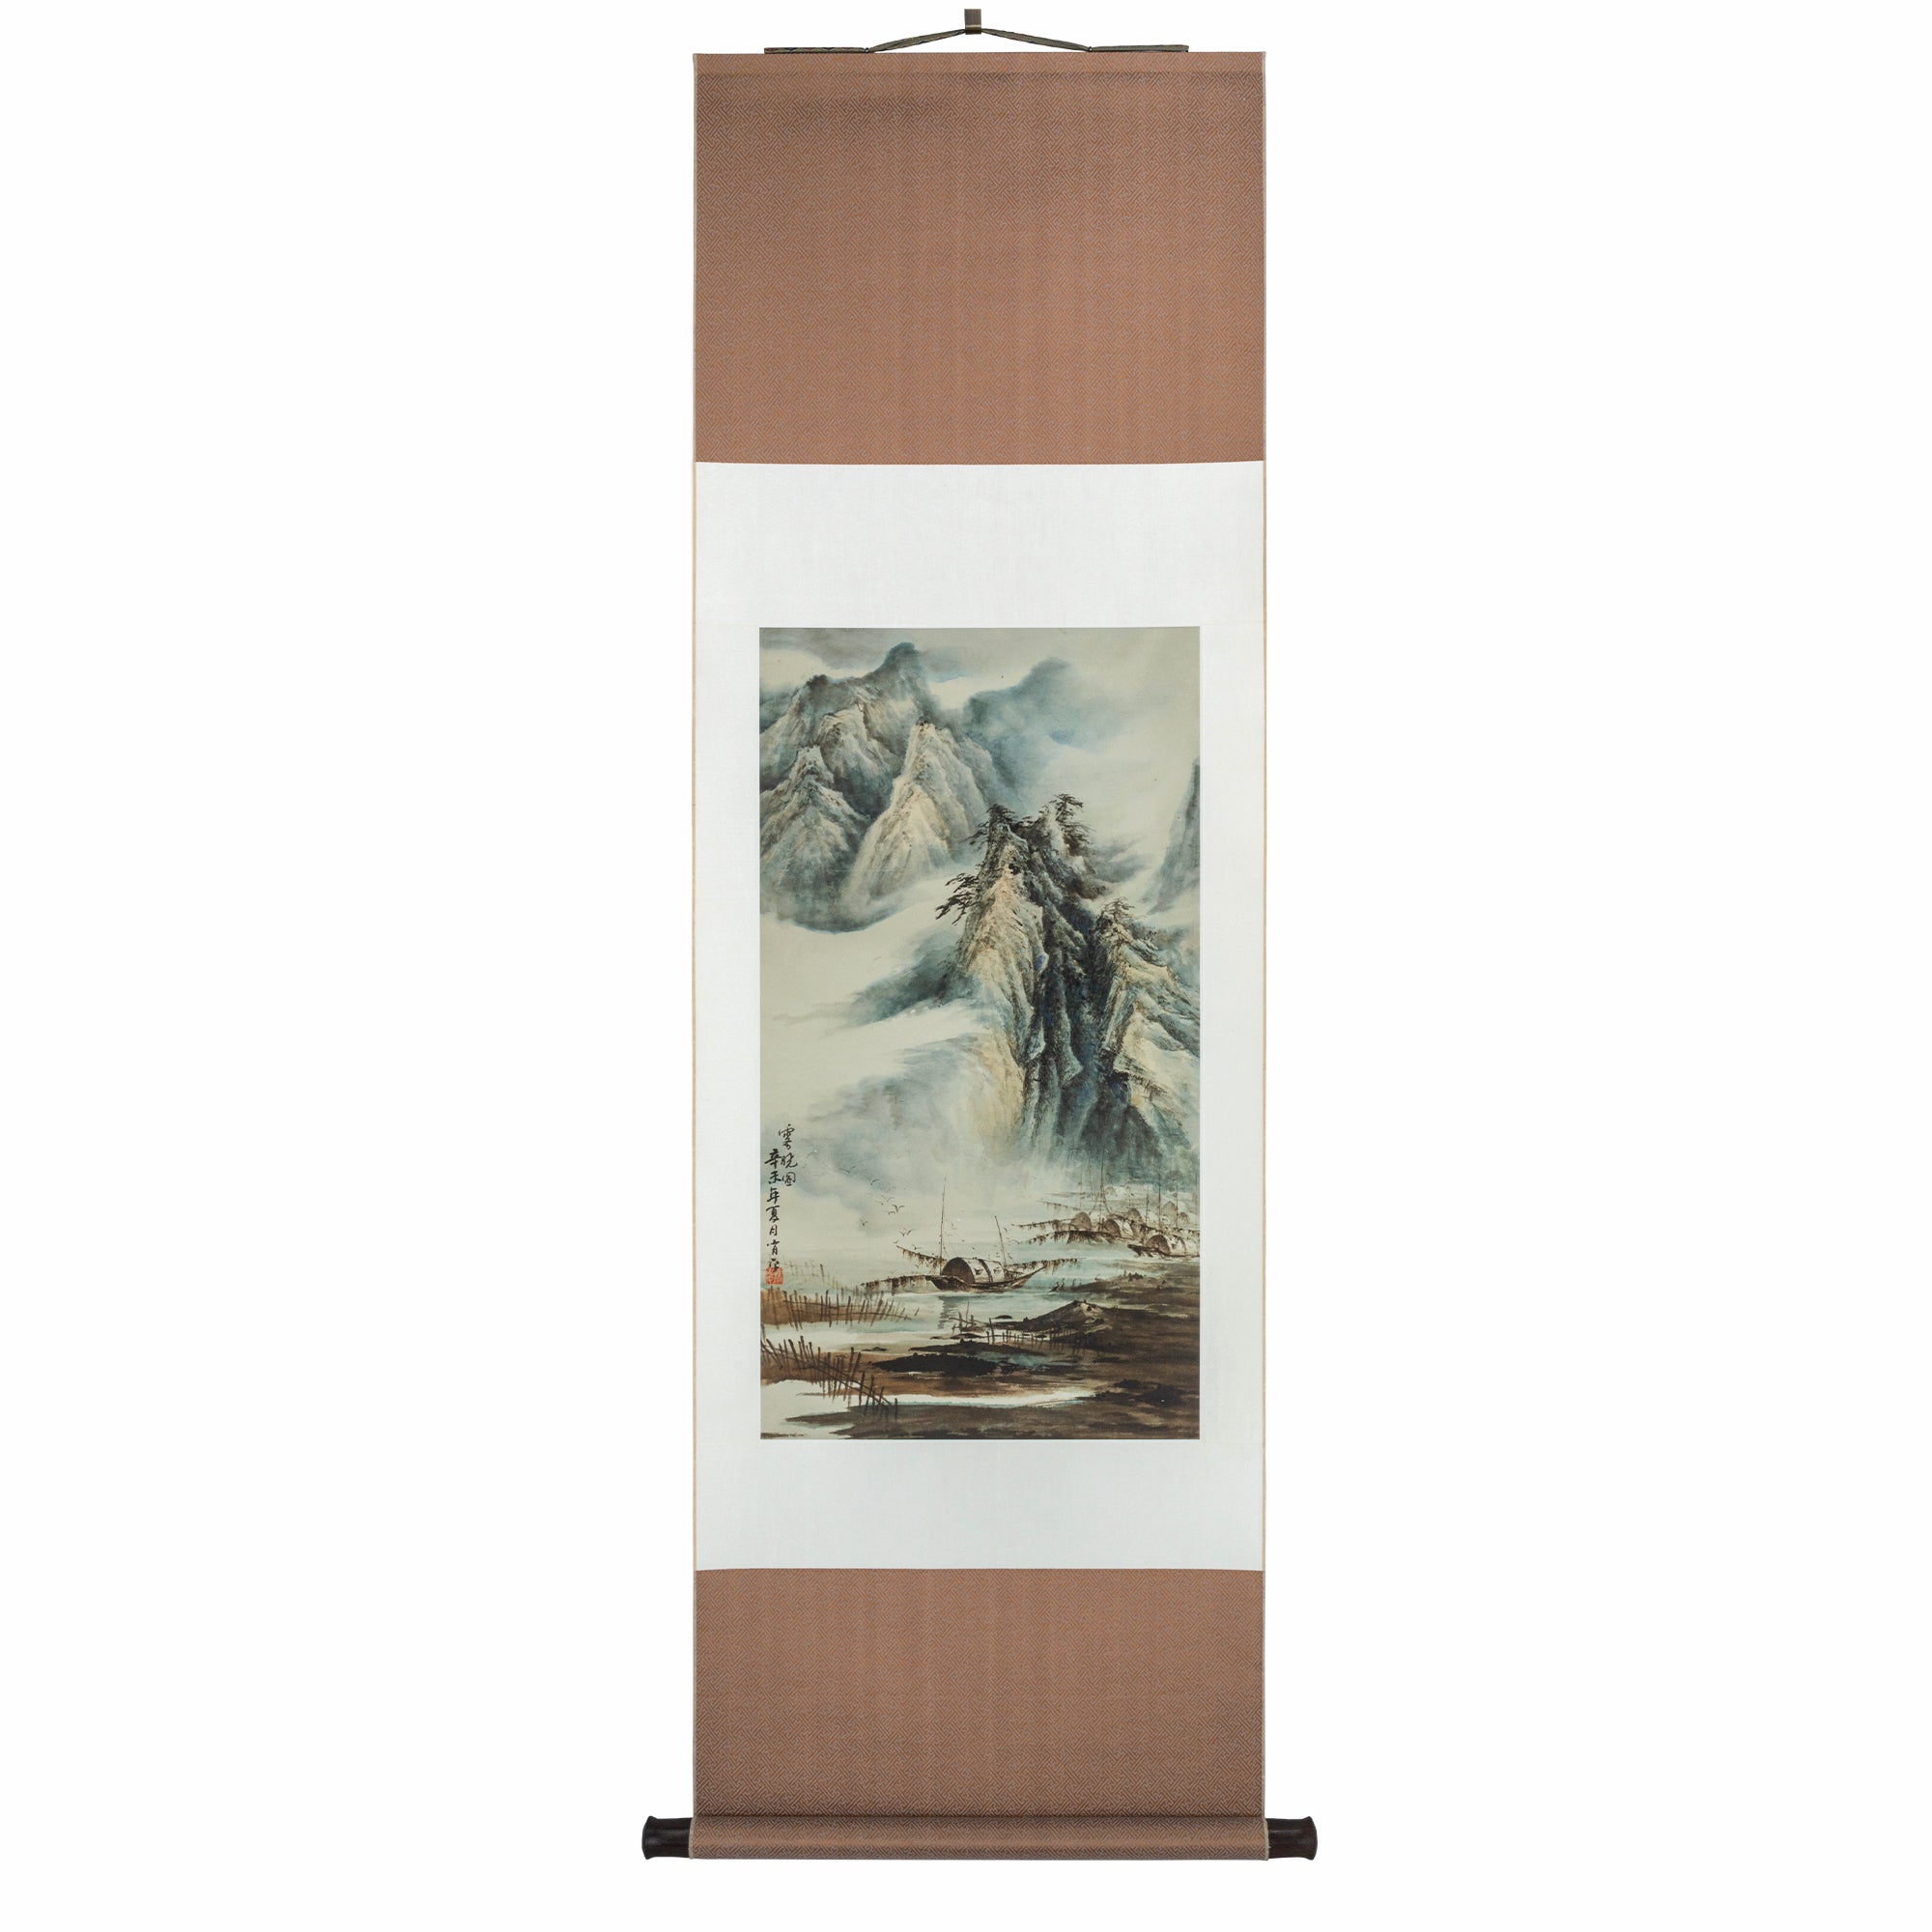 A Journey Beyond the Veil - Hanging Scroll